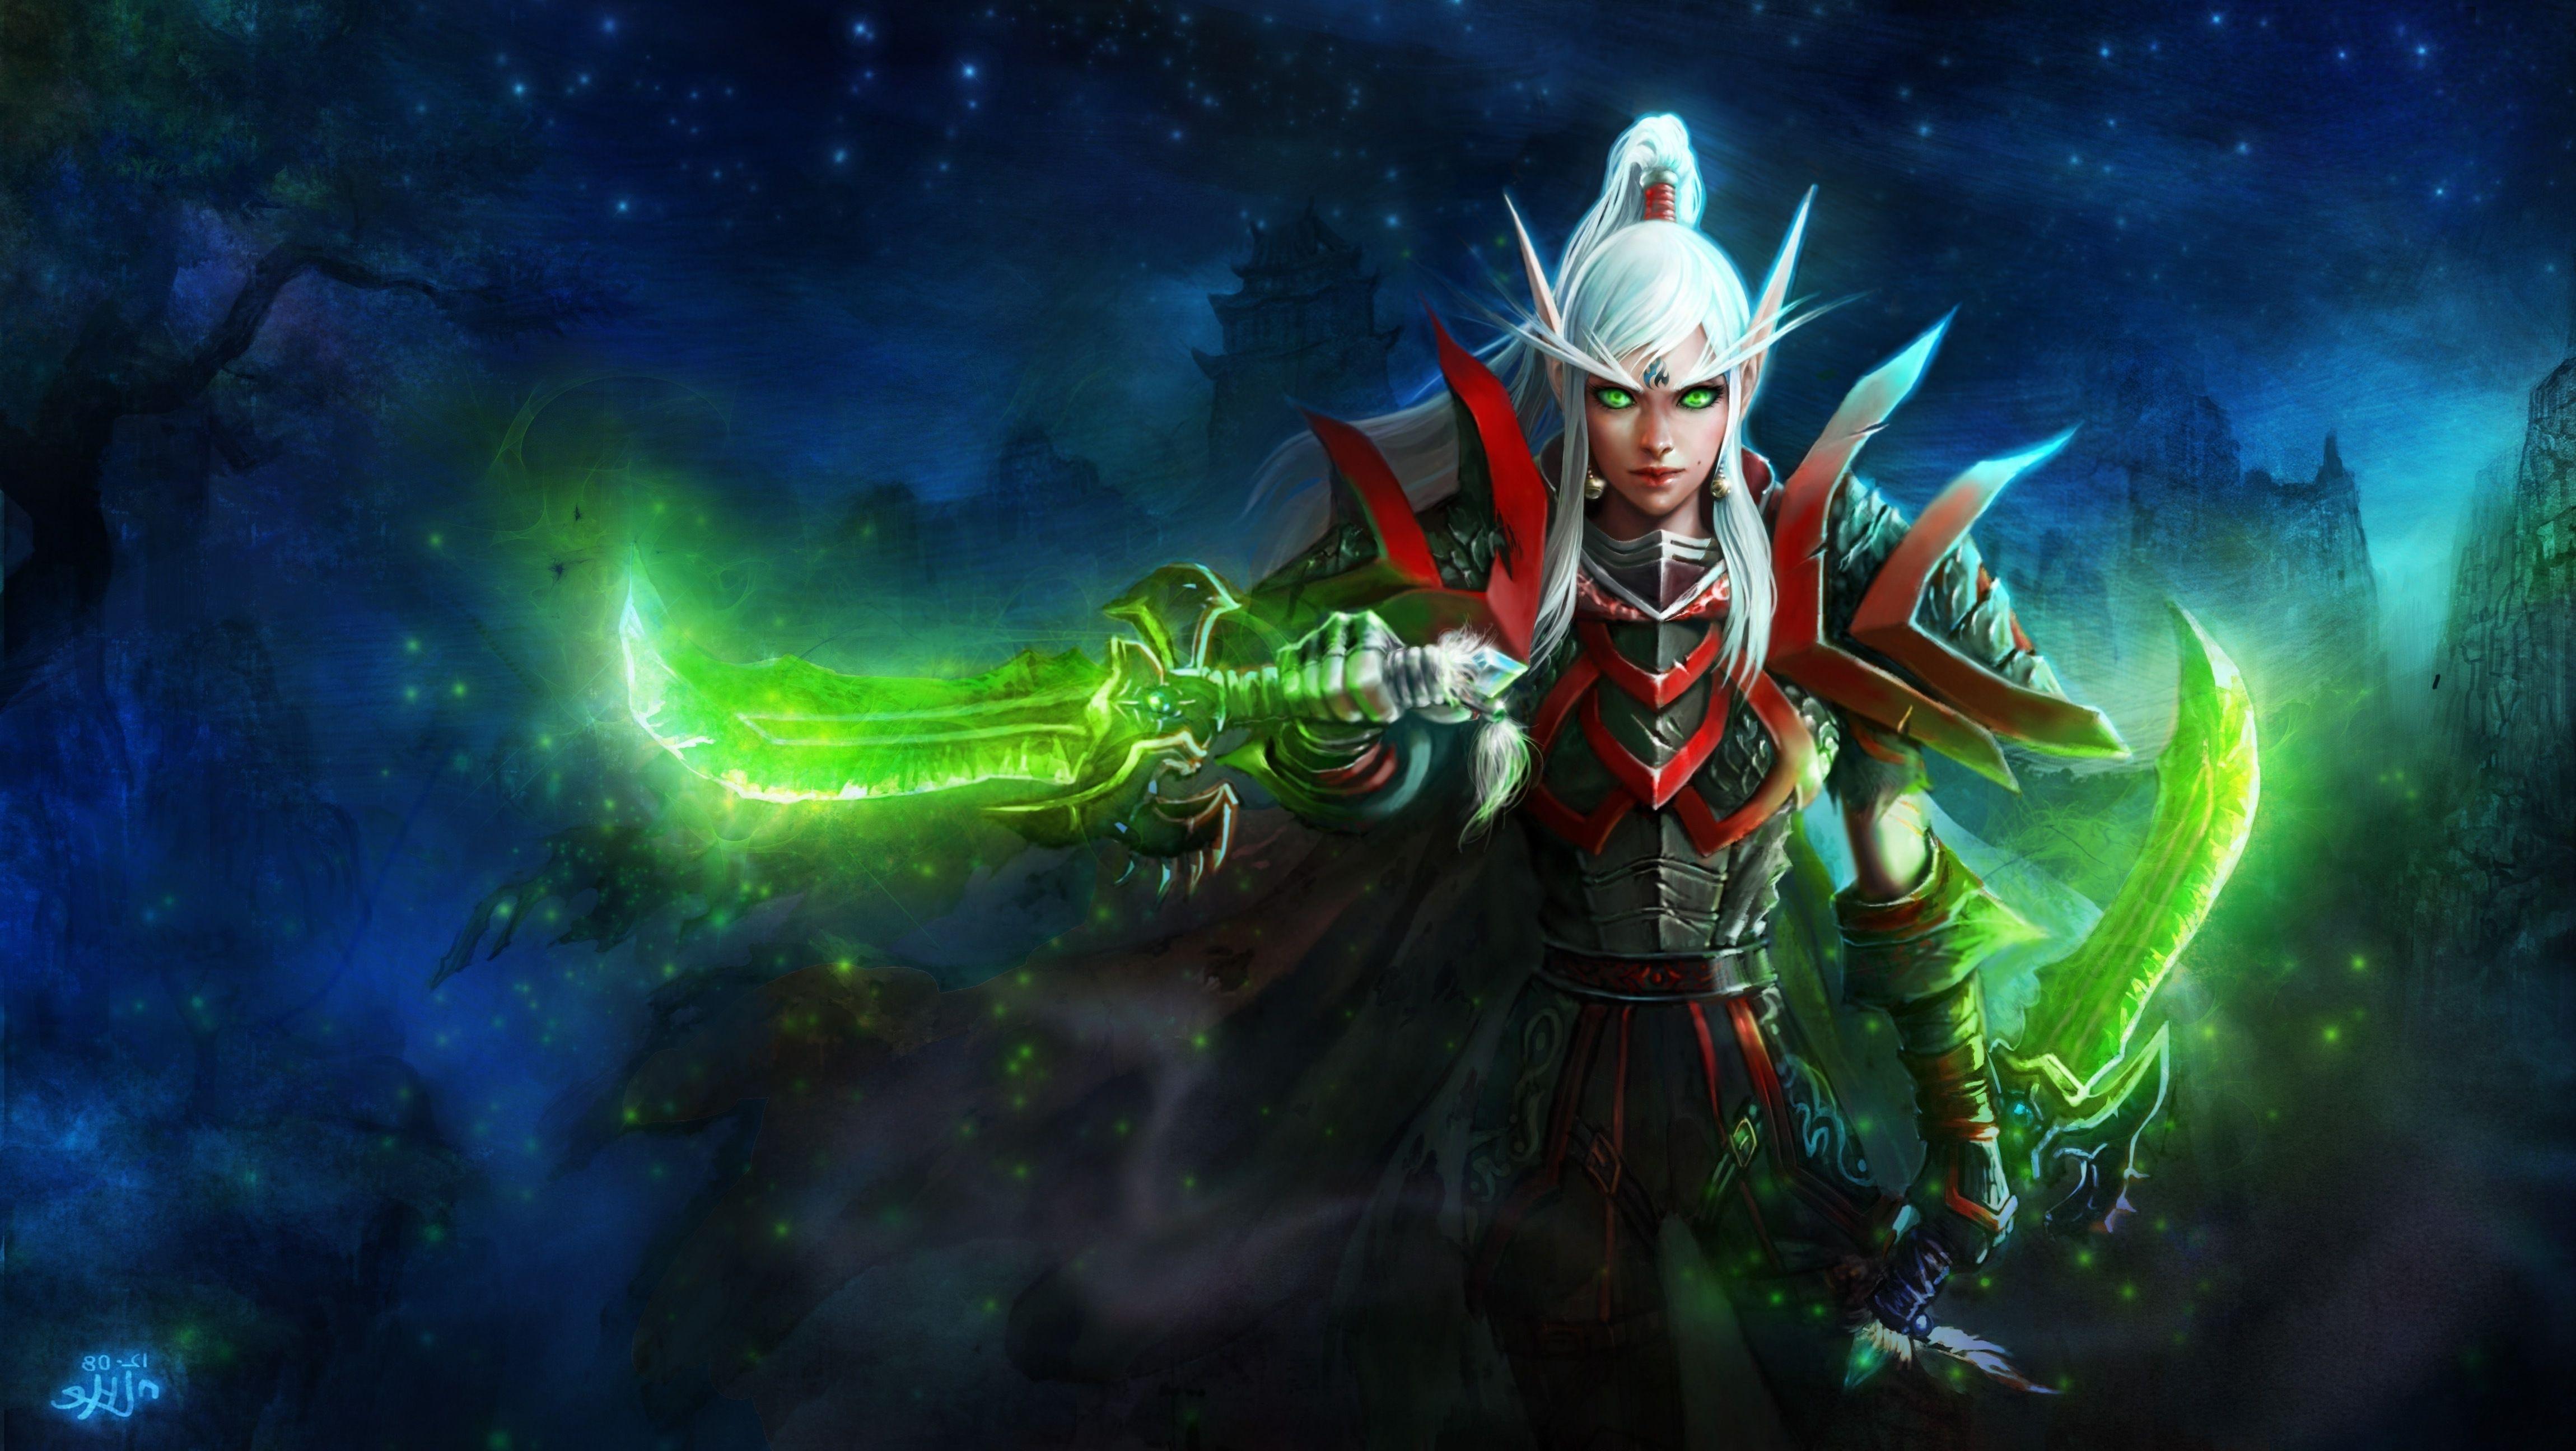 Amazing Blood Elf Wallpaper Hd in the year 2023 Learn more here 